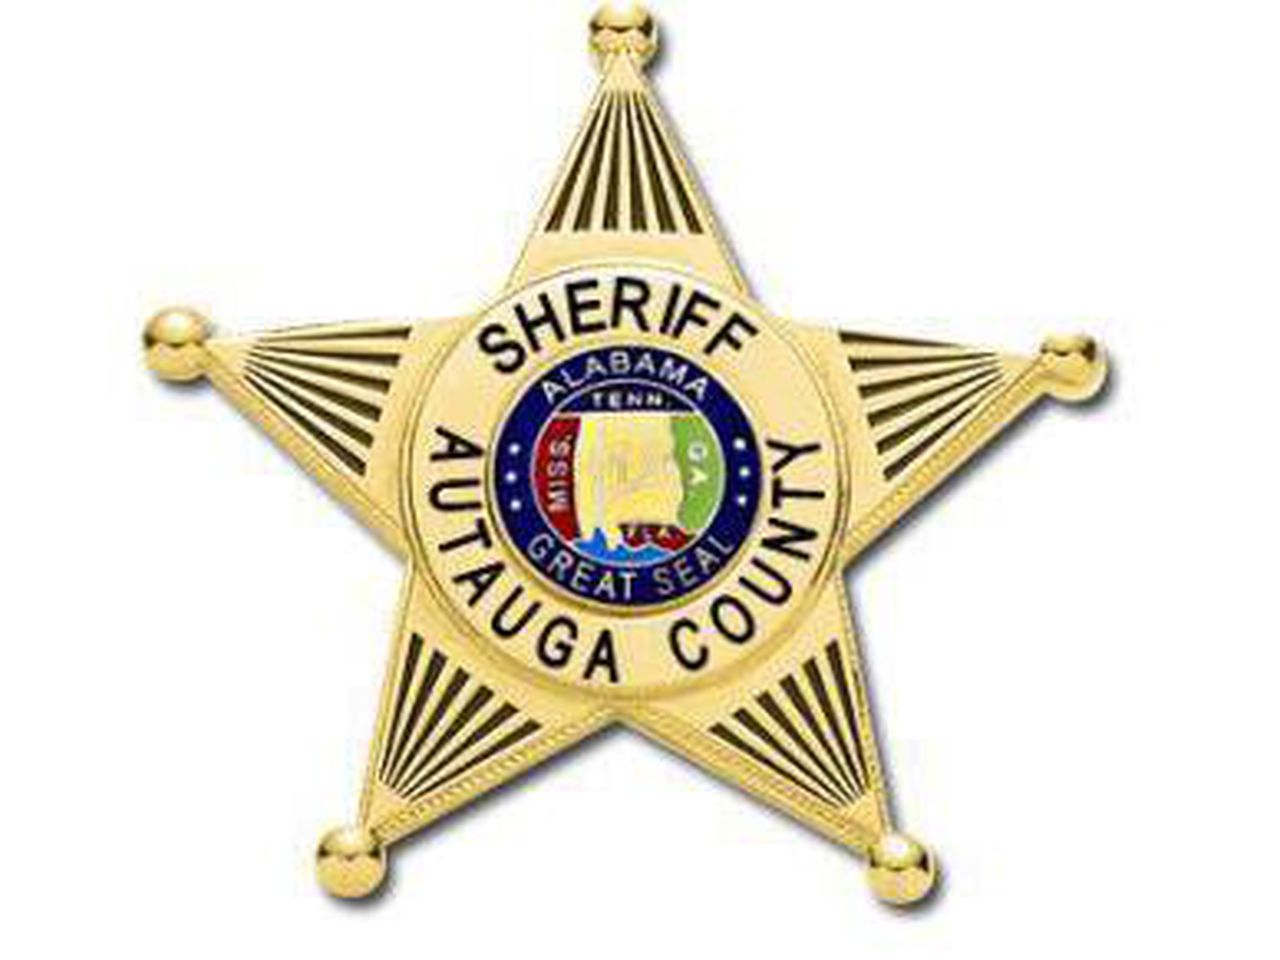 Days after a deadly tornado, Autauga County will have a new sheriff